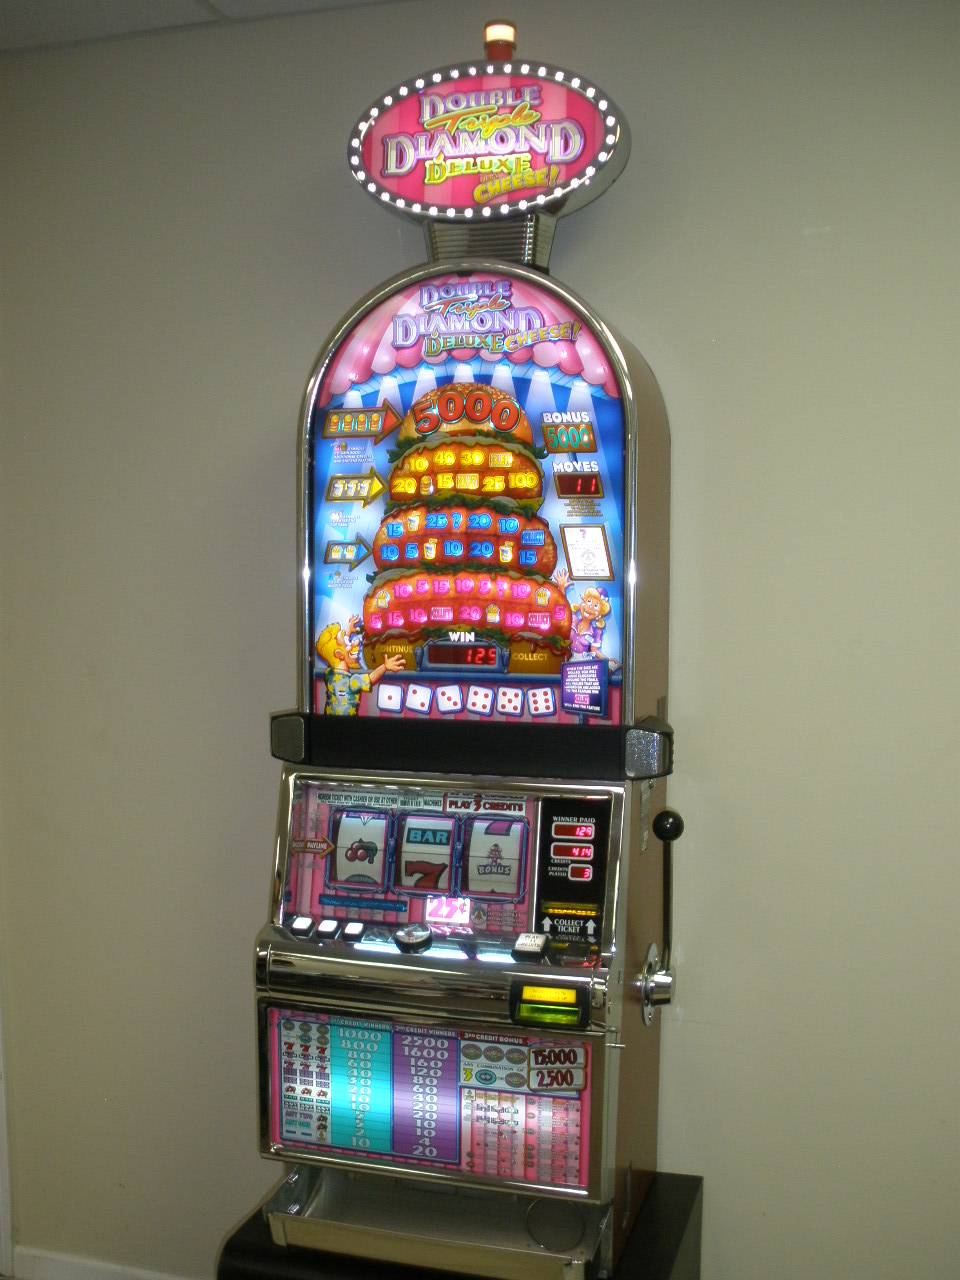 IGT TRIPLE DOUBLE DIAMOND DELUXE WITH CHEESE BARCREST S2000 SLOT